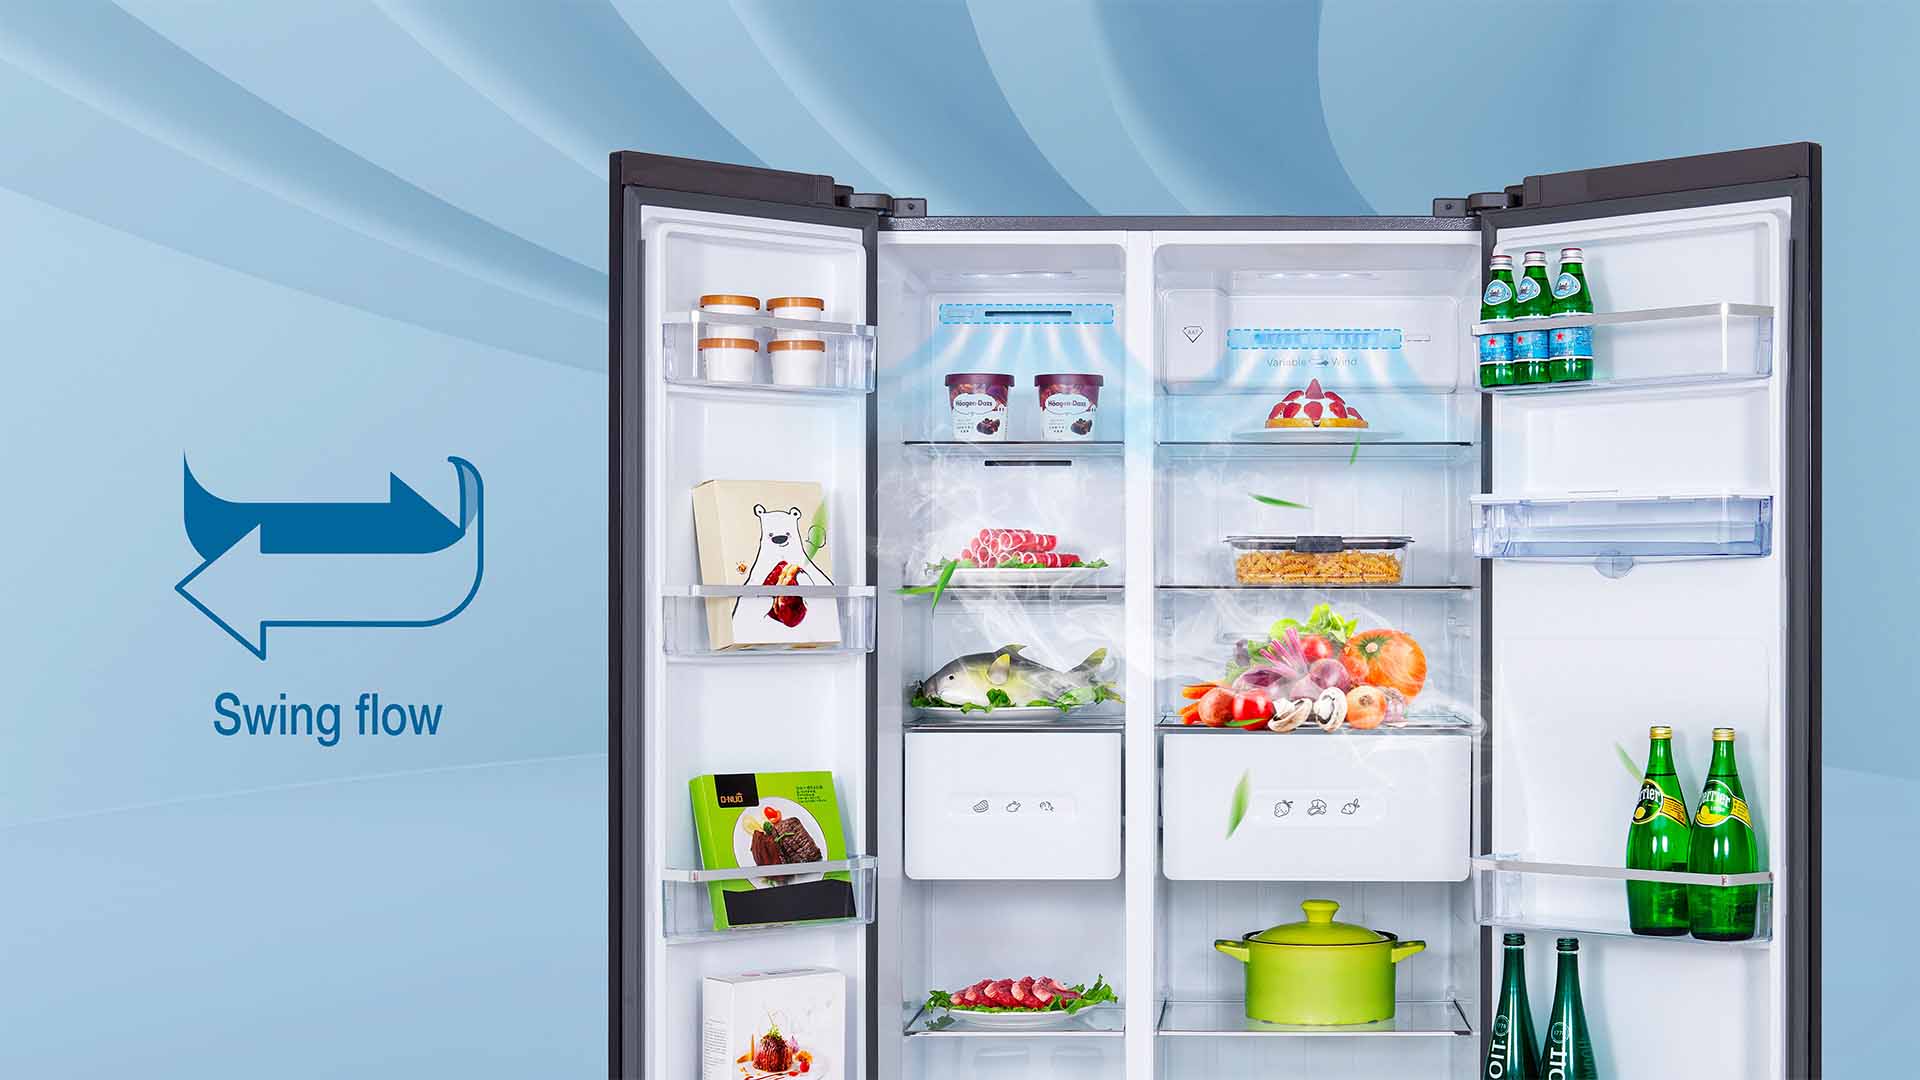 Swing Flow: Enhanced cooling system to keep food fresher and longer